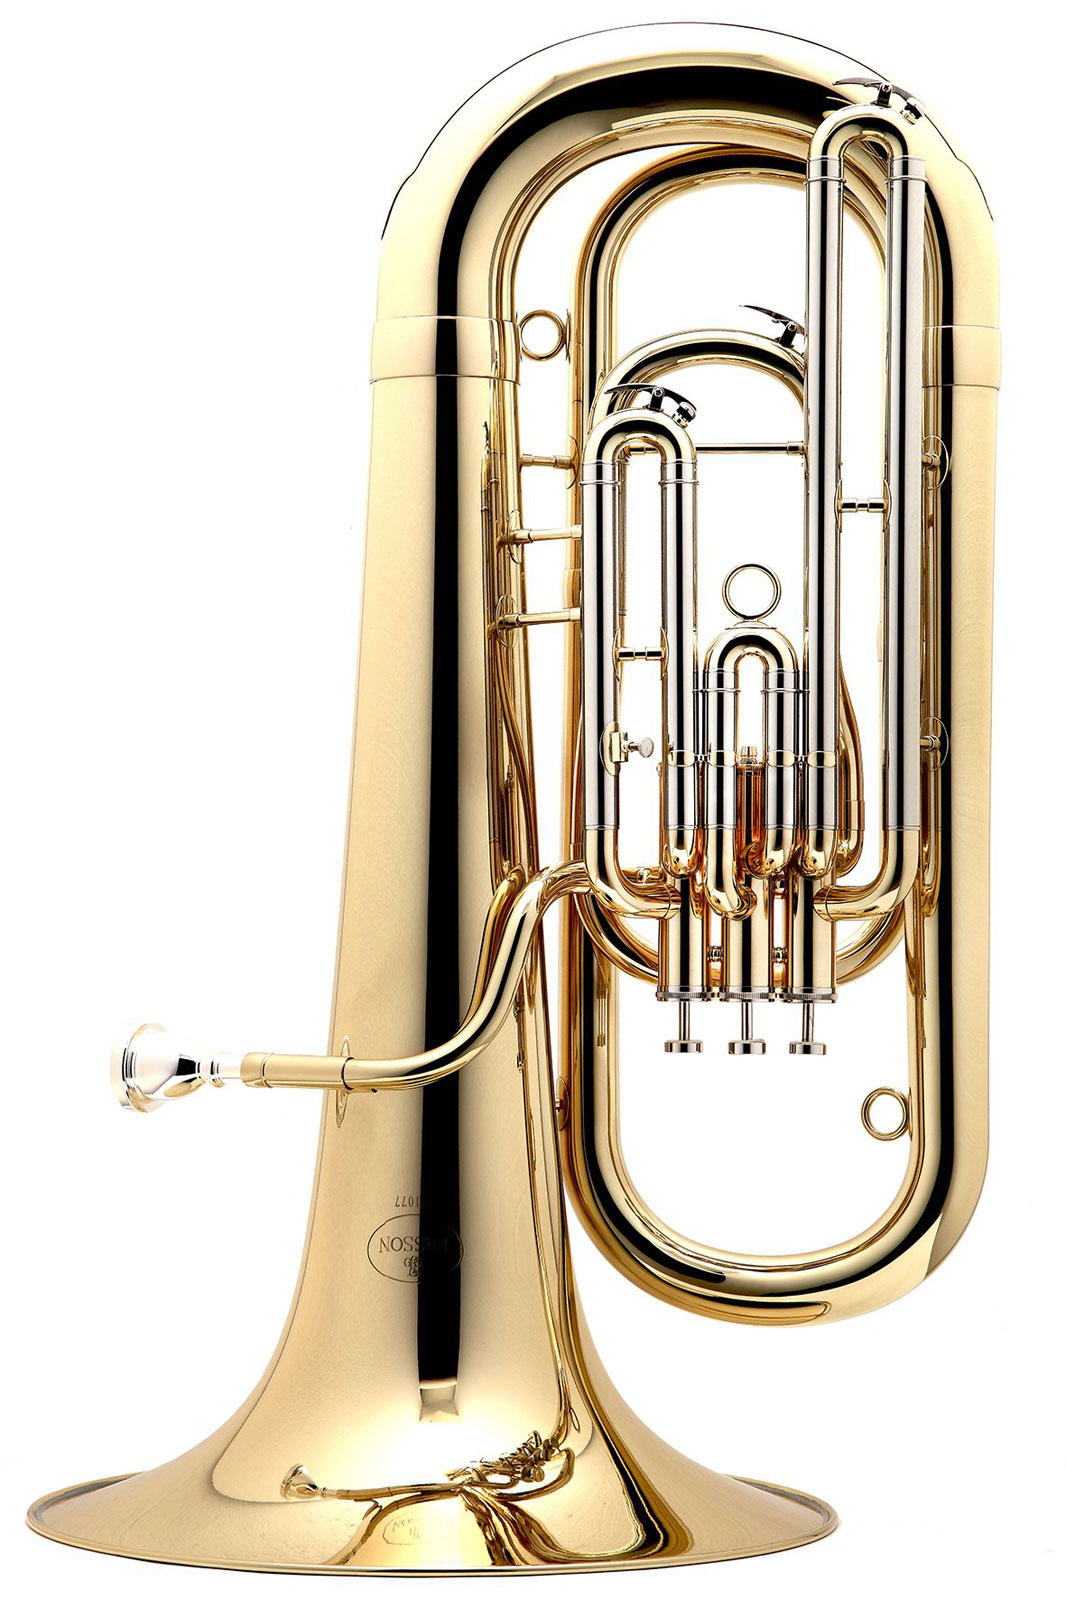 BESSON BE177-1-0 - PRODIGE 177 CLEAR LACQUER